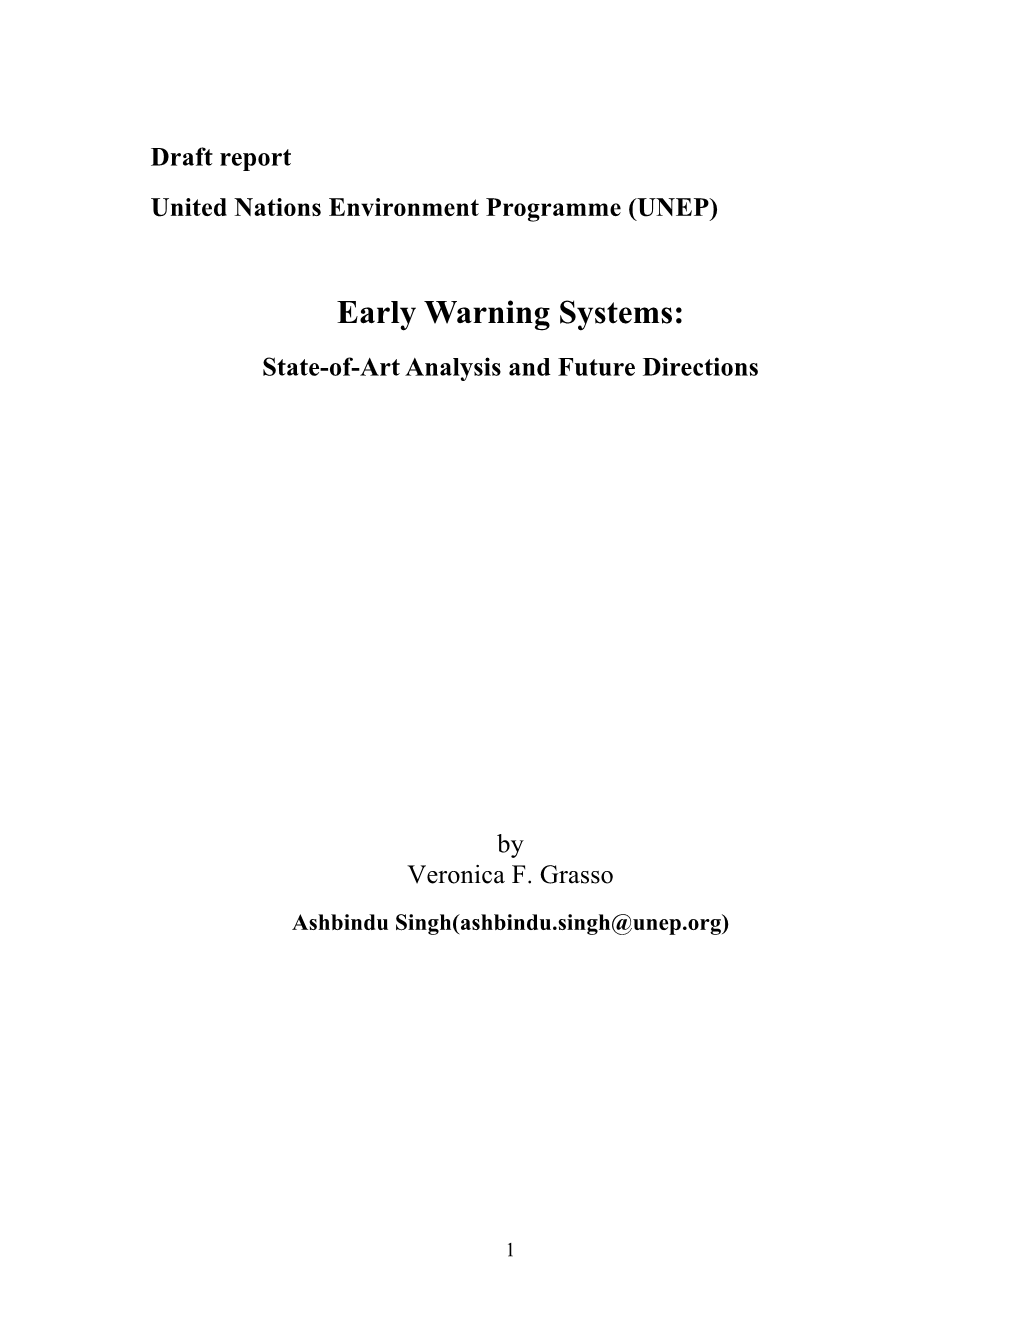 Early Warning Systems: State-Of-Art Analysis and Future Directions